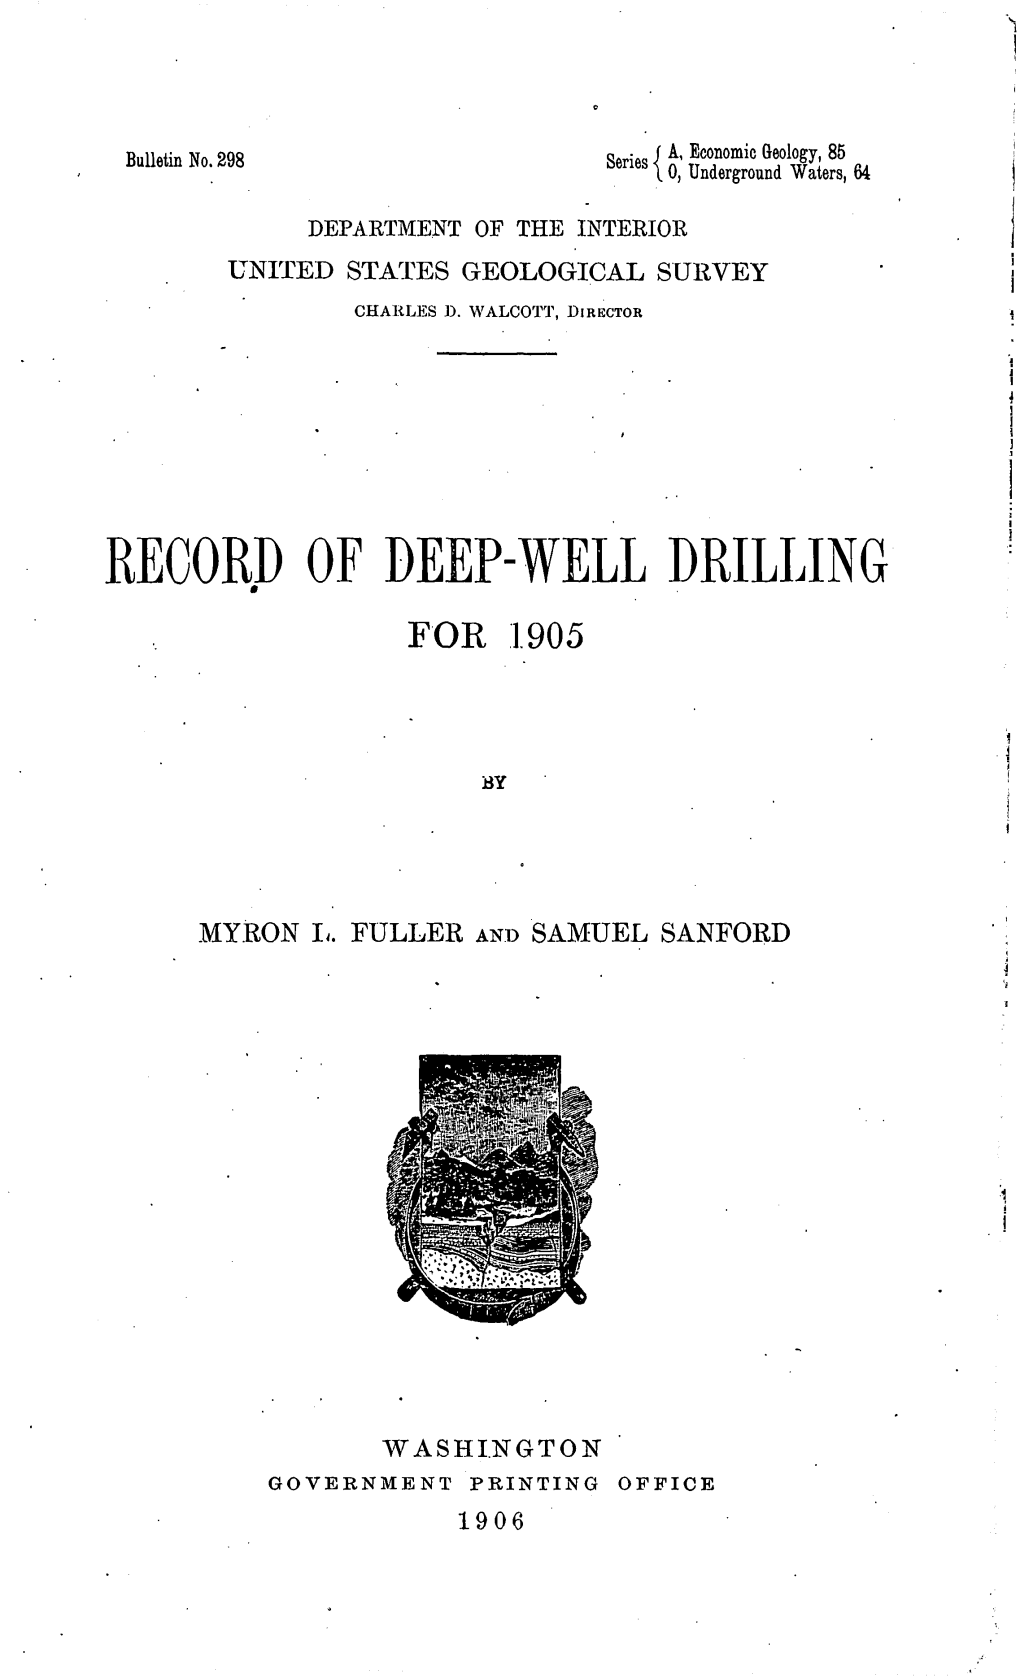 Record of Deep-Well Drilling for 1905